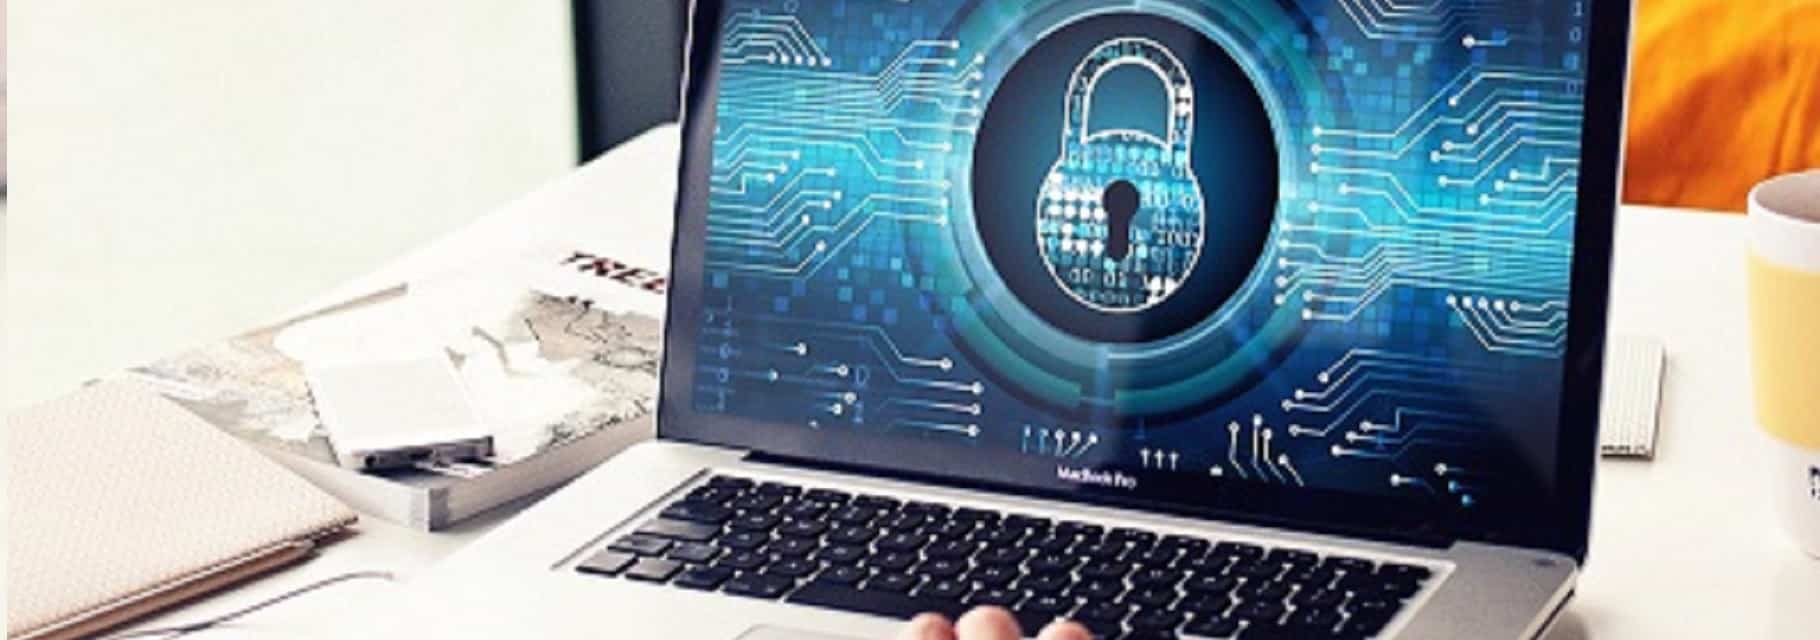 7 Essential Measures for Laptop Security this Summer